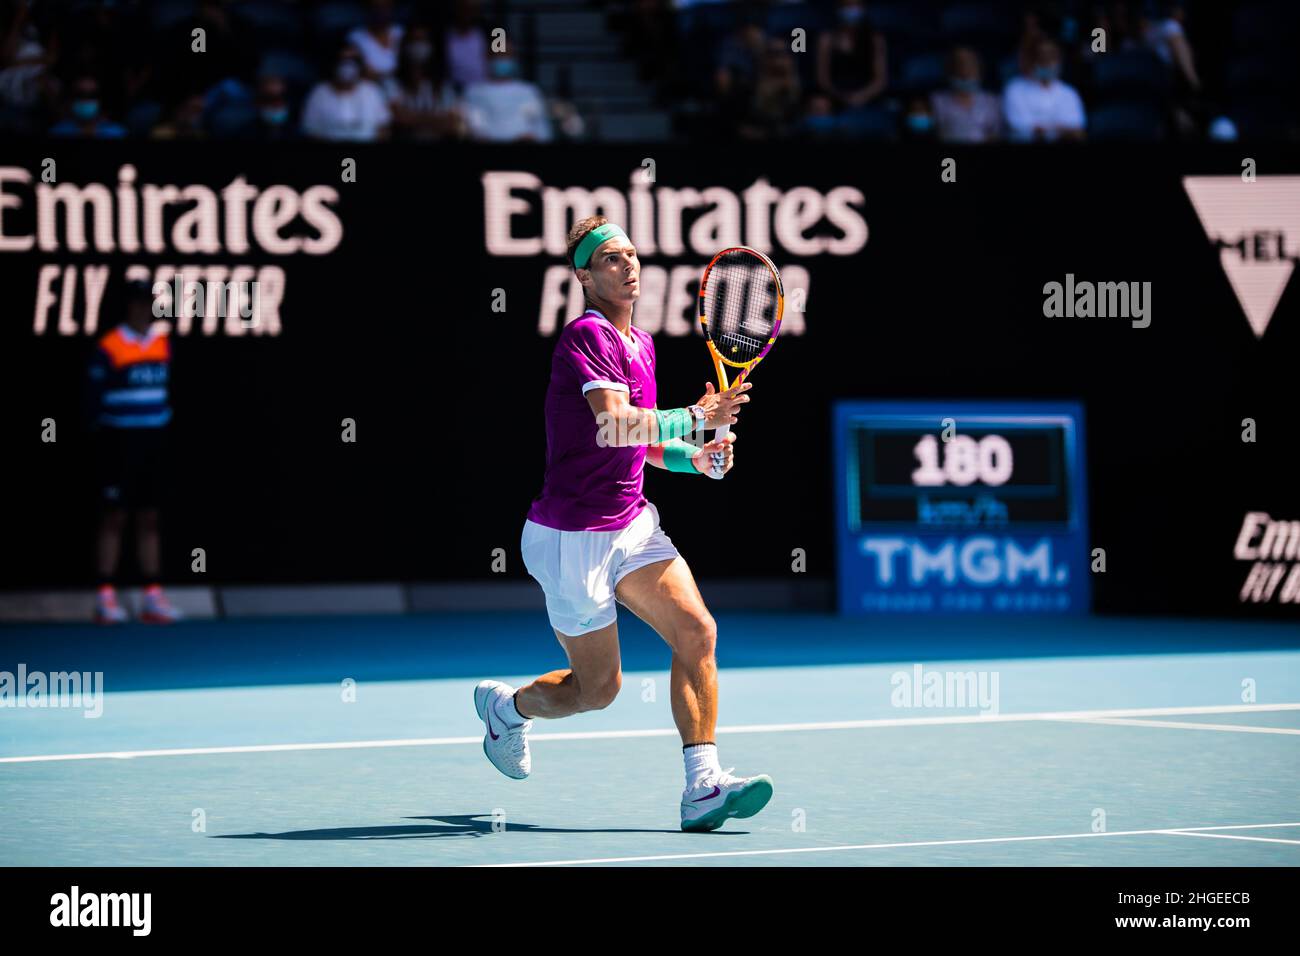 Rafael Nadal is moving closer to the net in a match against Marcus Giron during the Australian Open 2022 Round 1 match of the Grand Slam at Rod Laver Arena in Melbourne